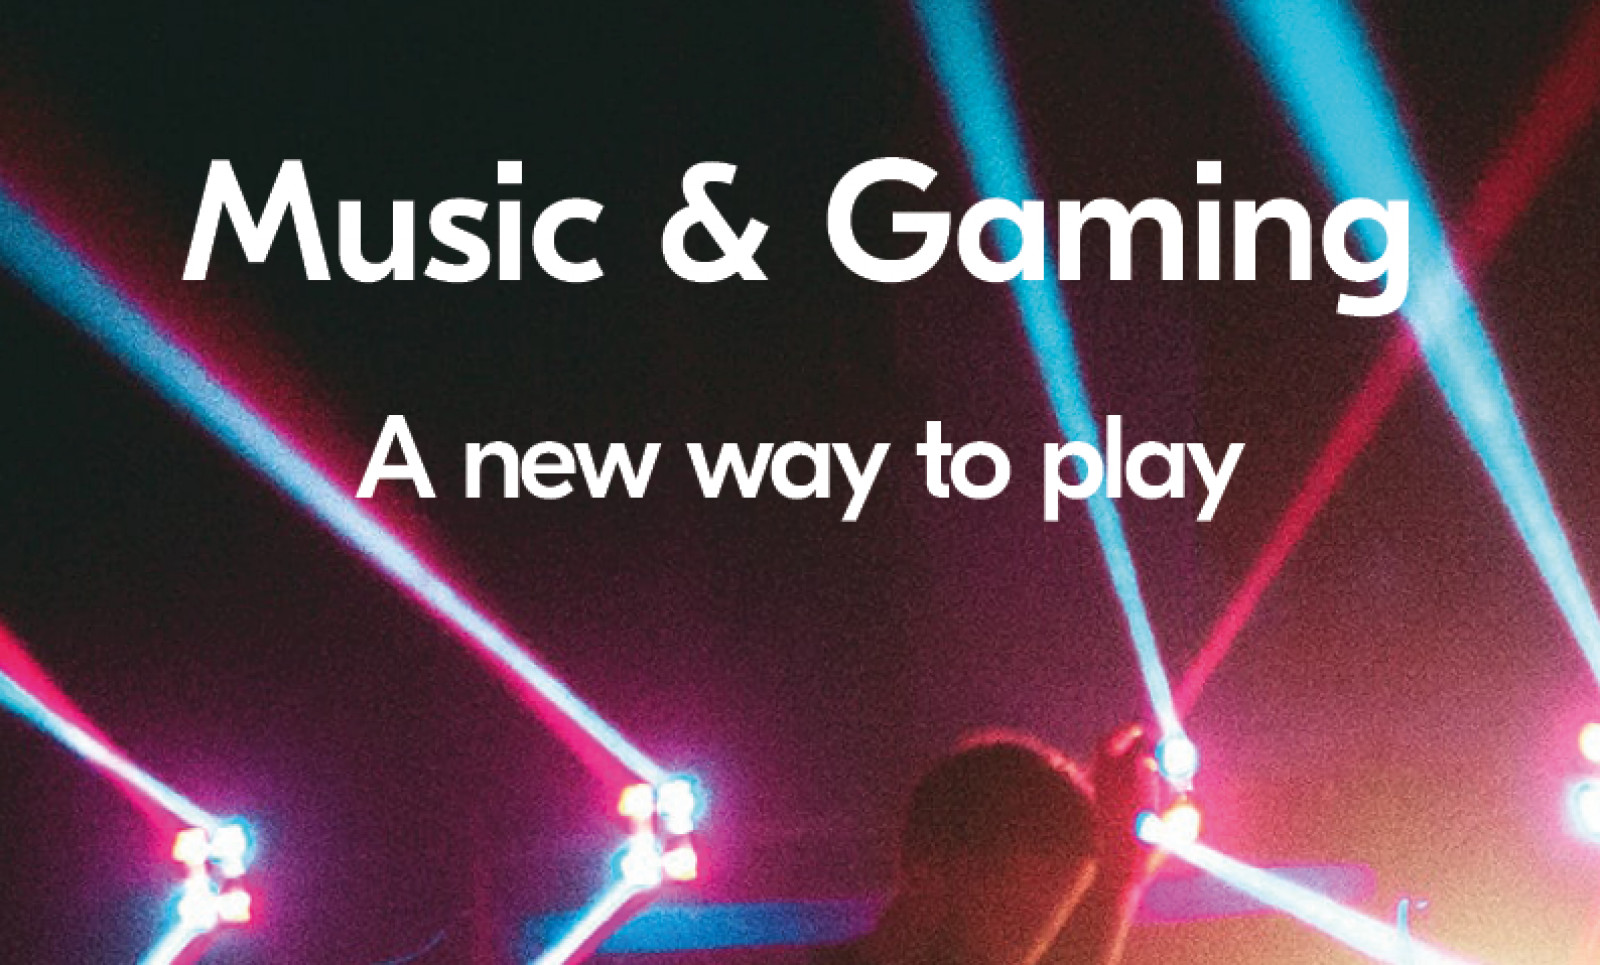 Free report: Music & Gaming - A new way to play